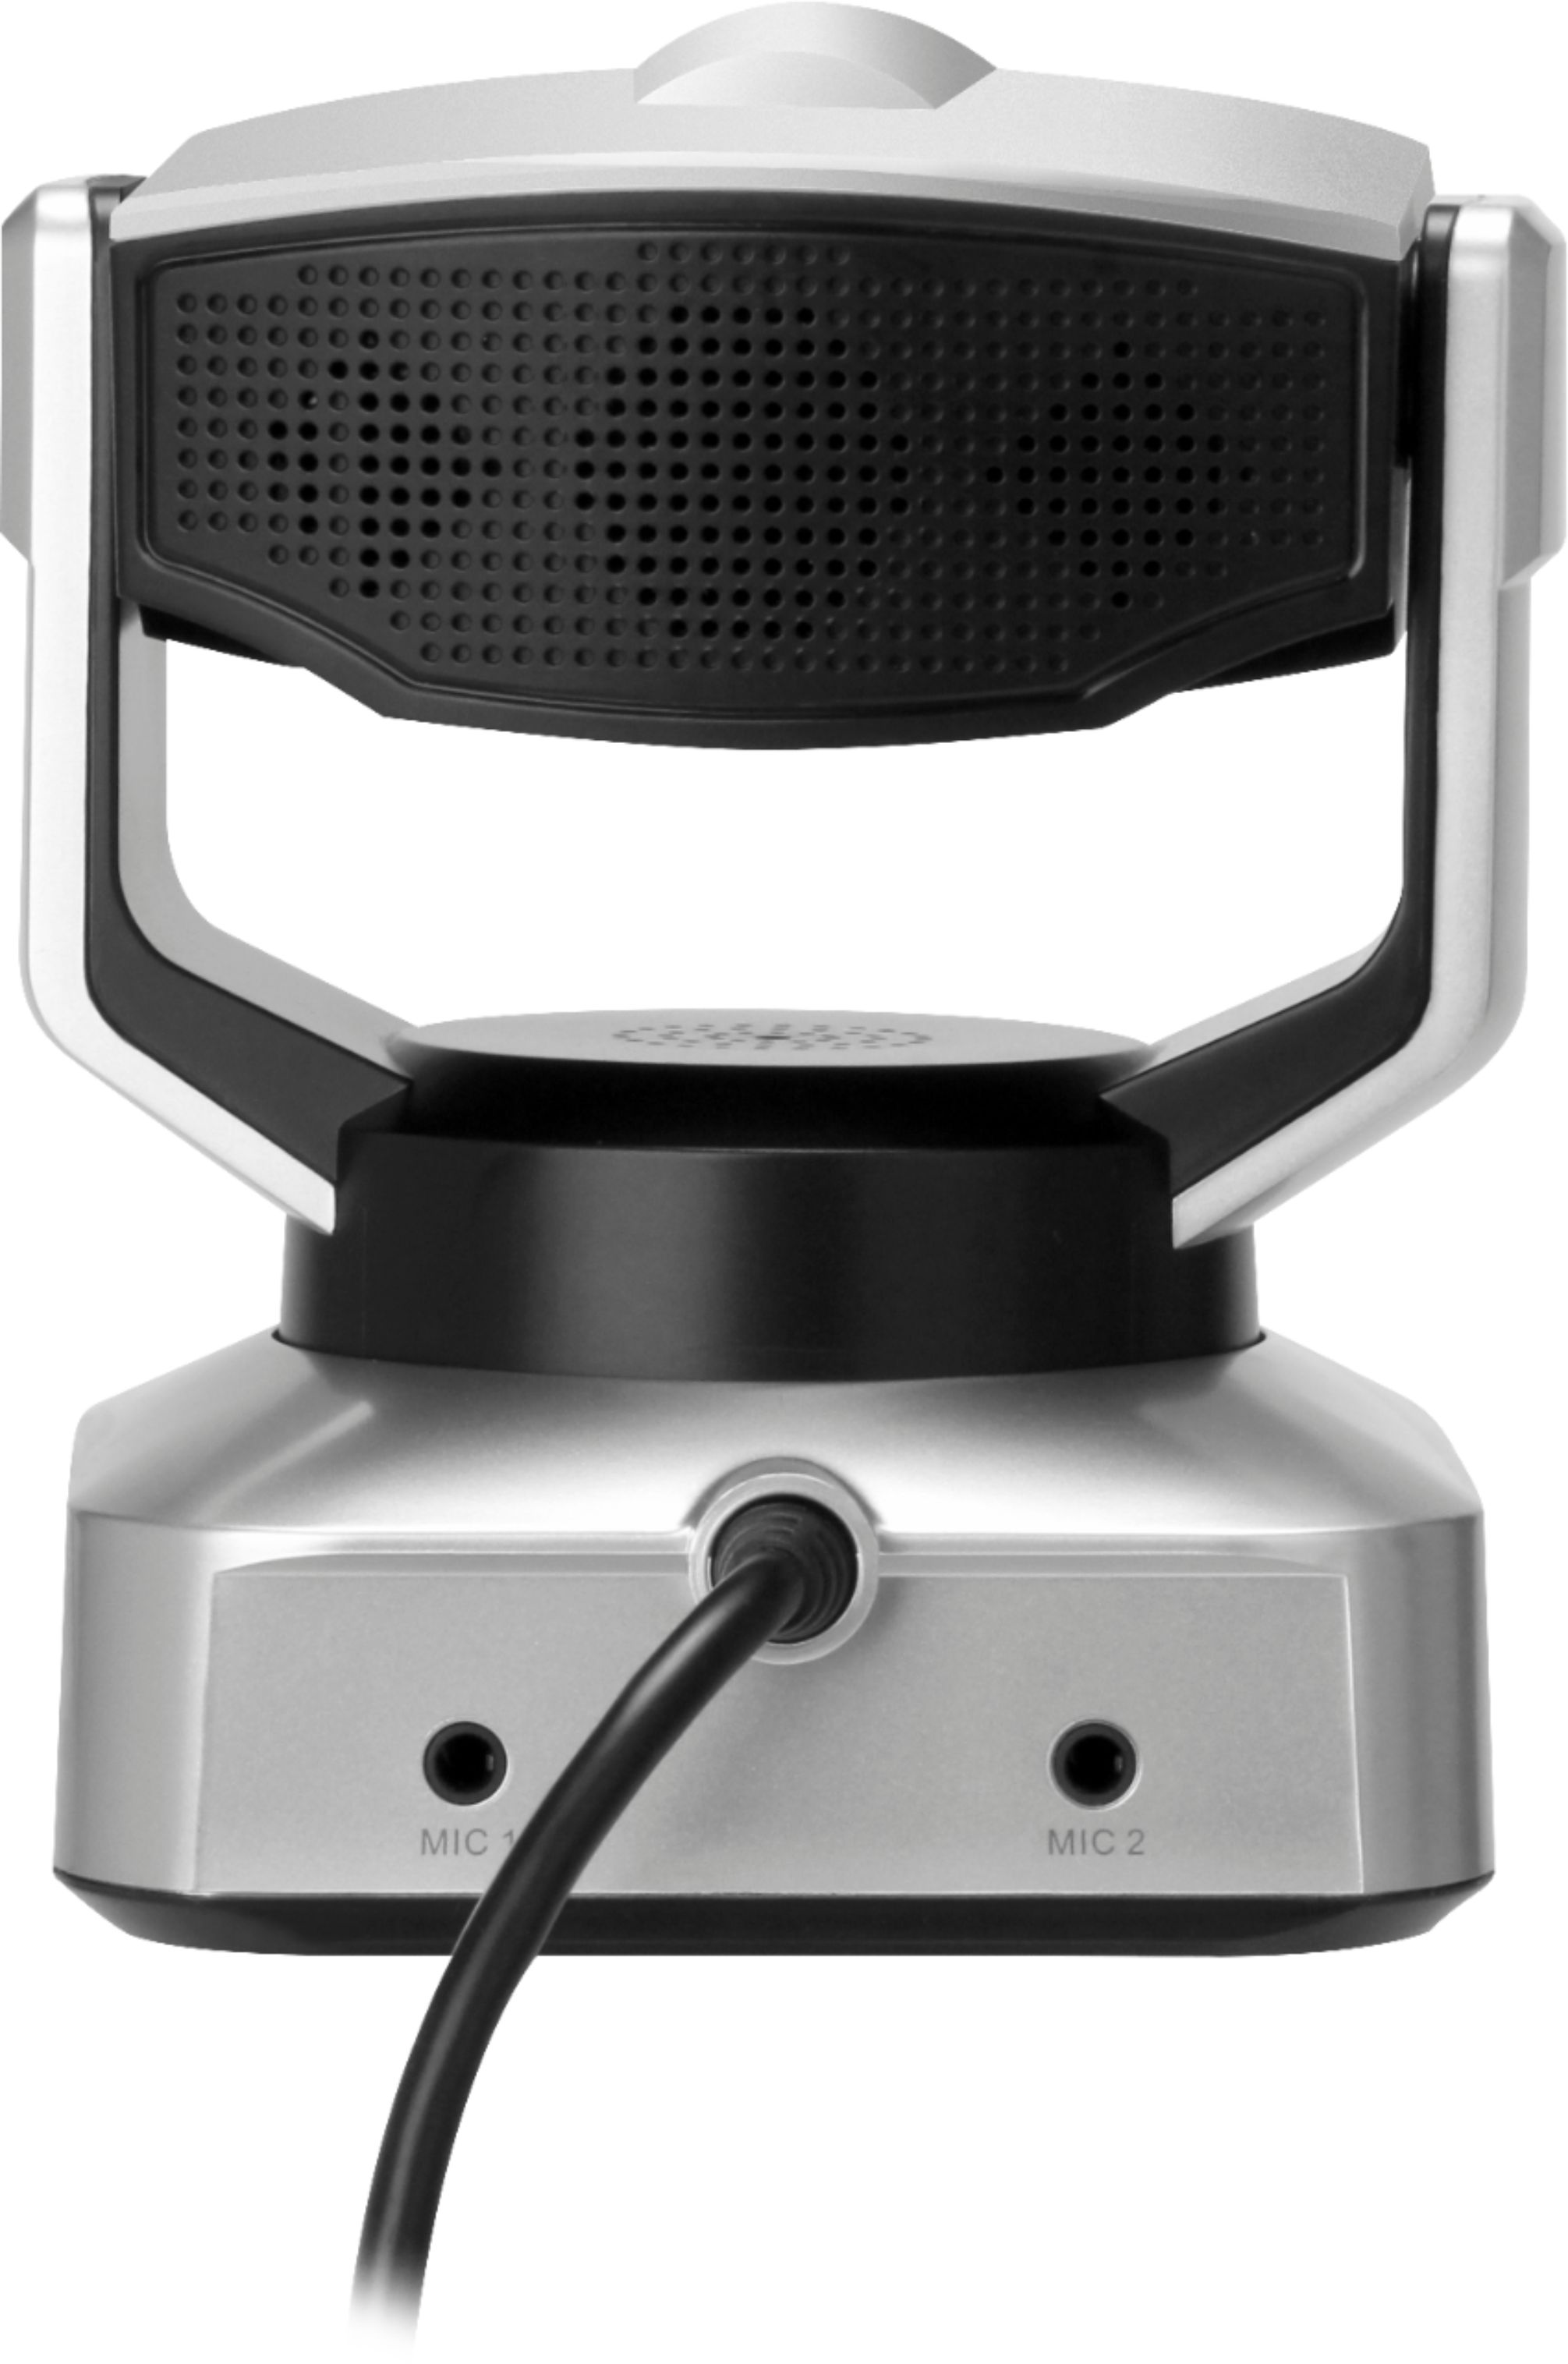 Angle View: MEE audio - 3840 x 2160 Webcam with Pan-Tilt-Zoom, for Remote Conferencing